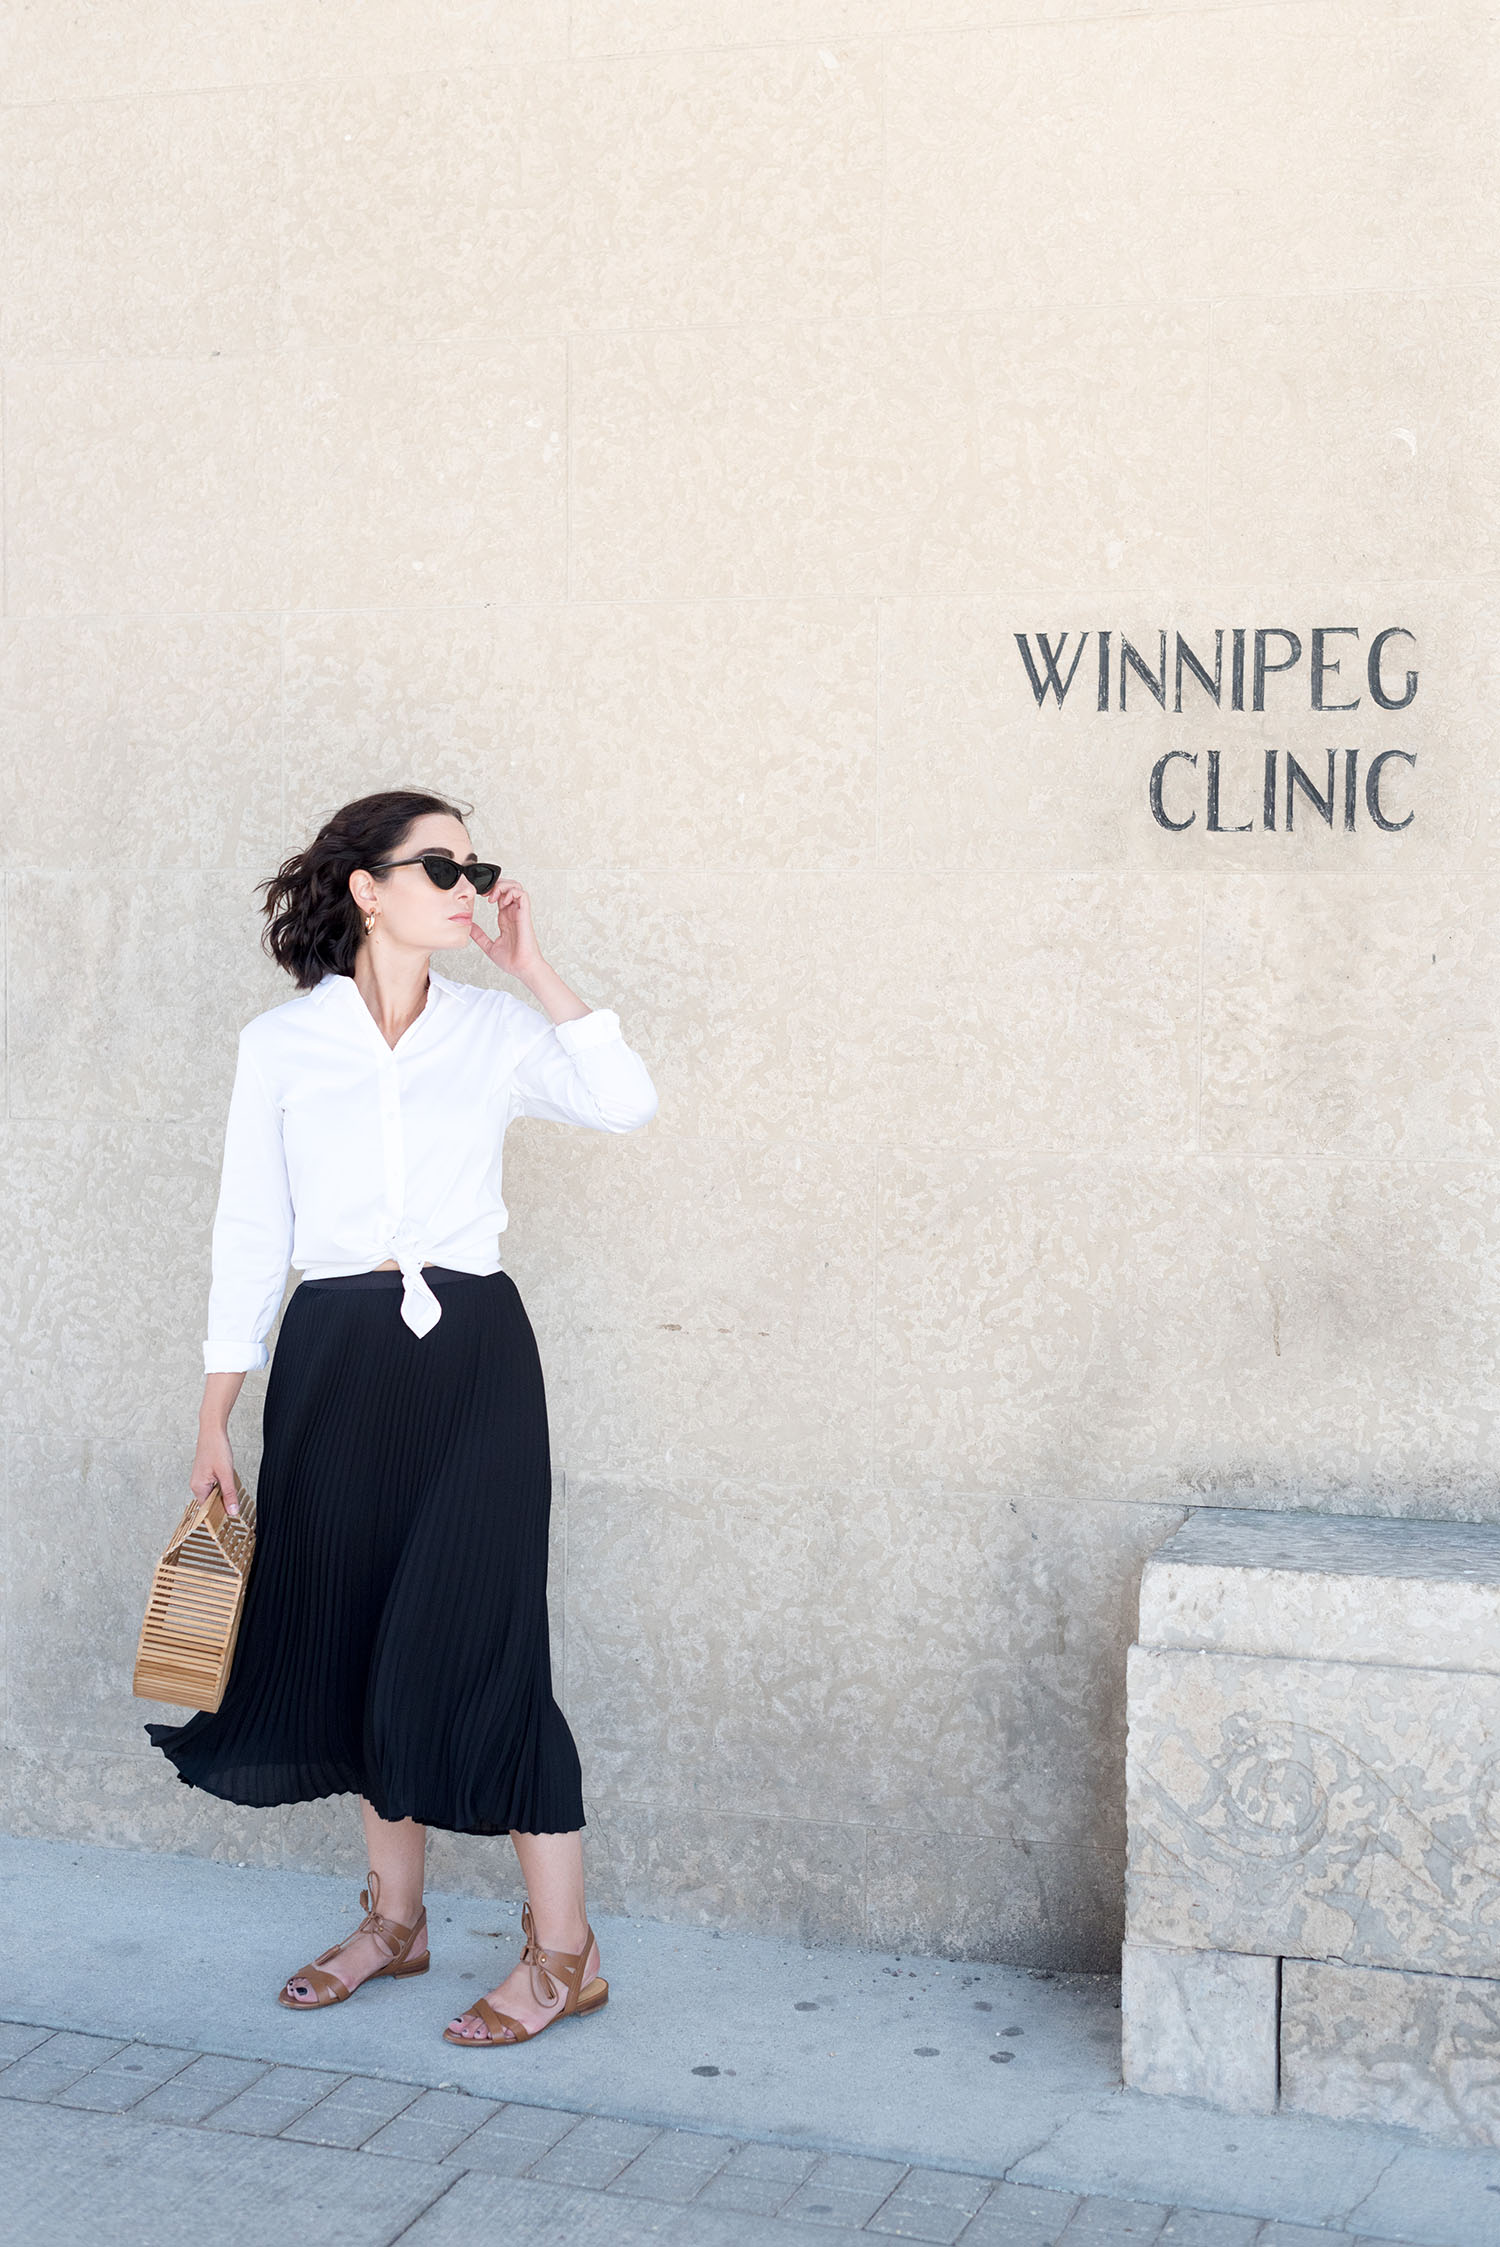 Top Winnipeg fashion blogger Cee Fardoe of Coco & Vera stands outside the Winnipeg Clinic wearing a black pleated skirt from Aritzia and white blouse from Uniqlo